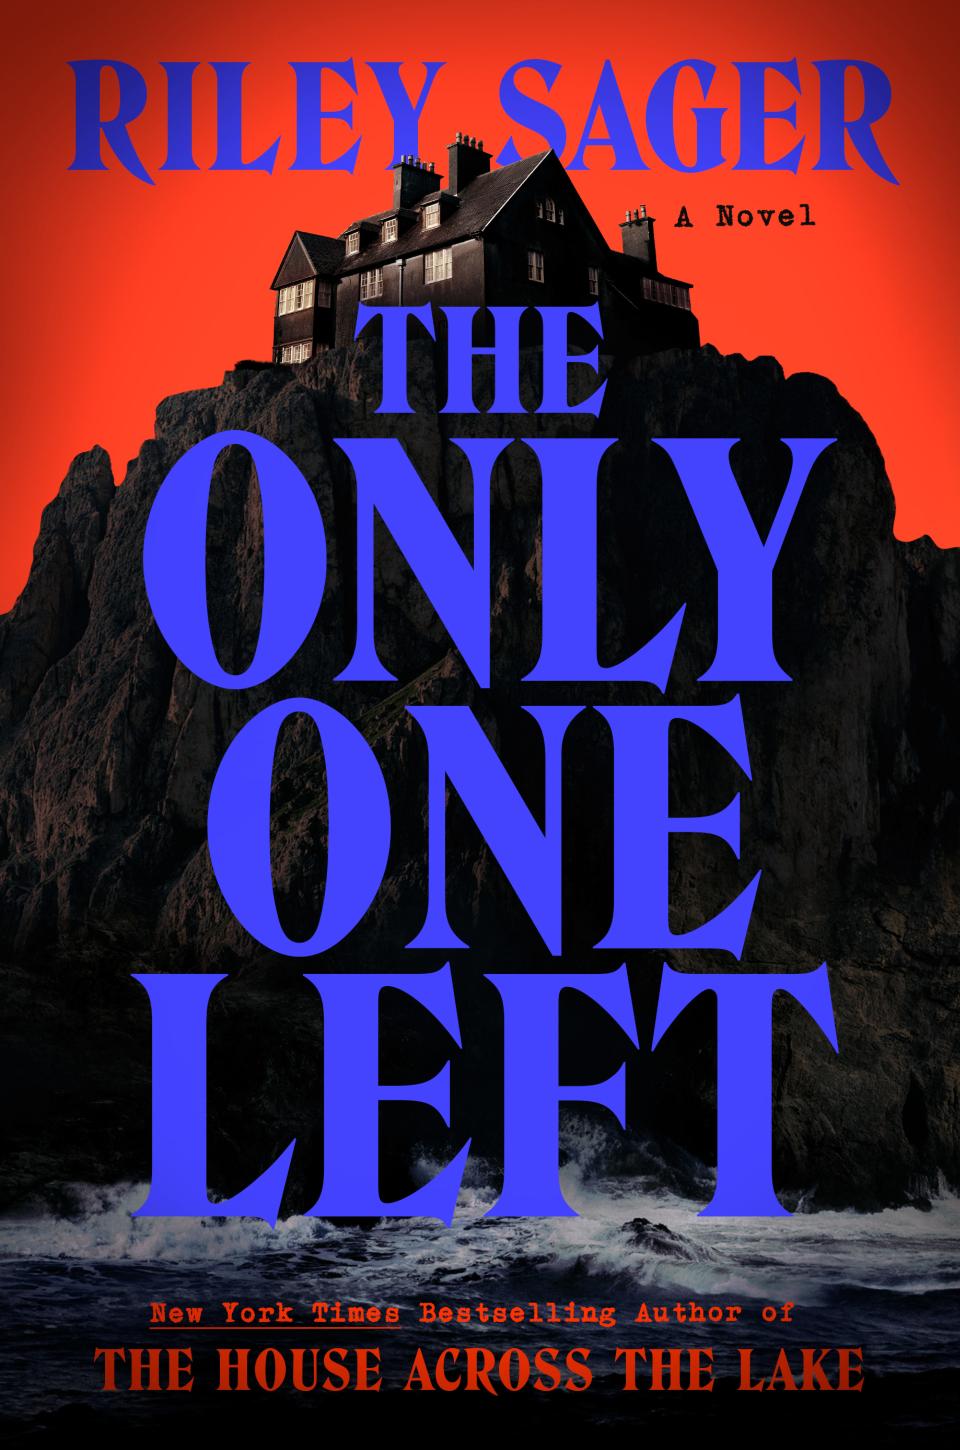 'The Only One Left' (Dutton, 2023) is the latest novel by Riley Sager